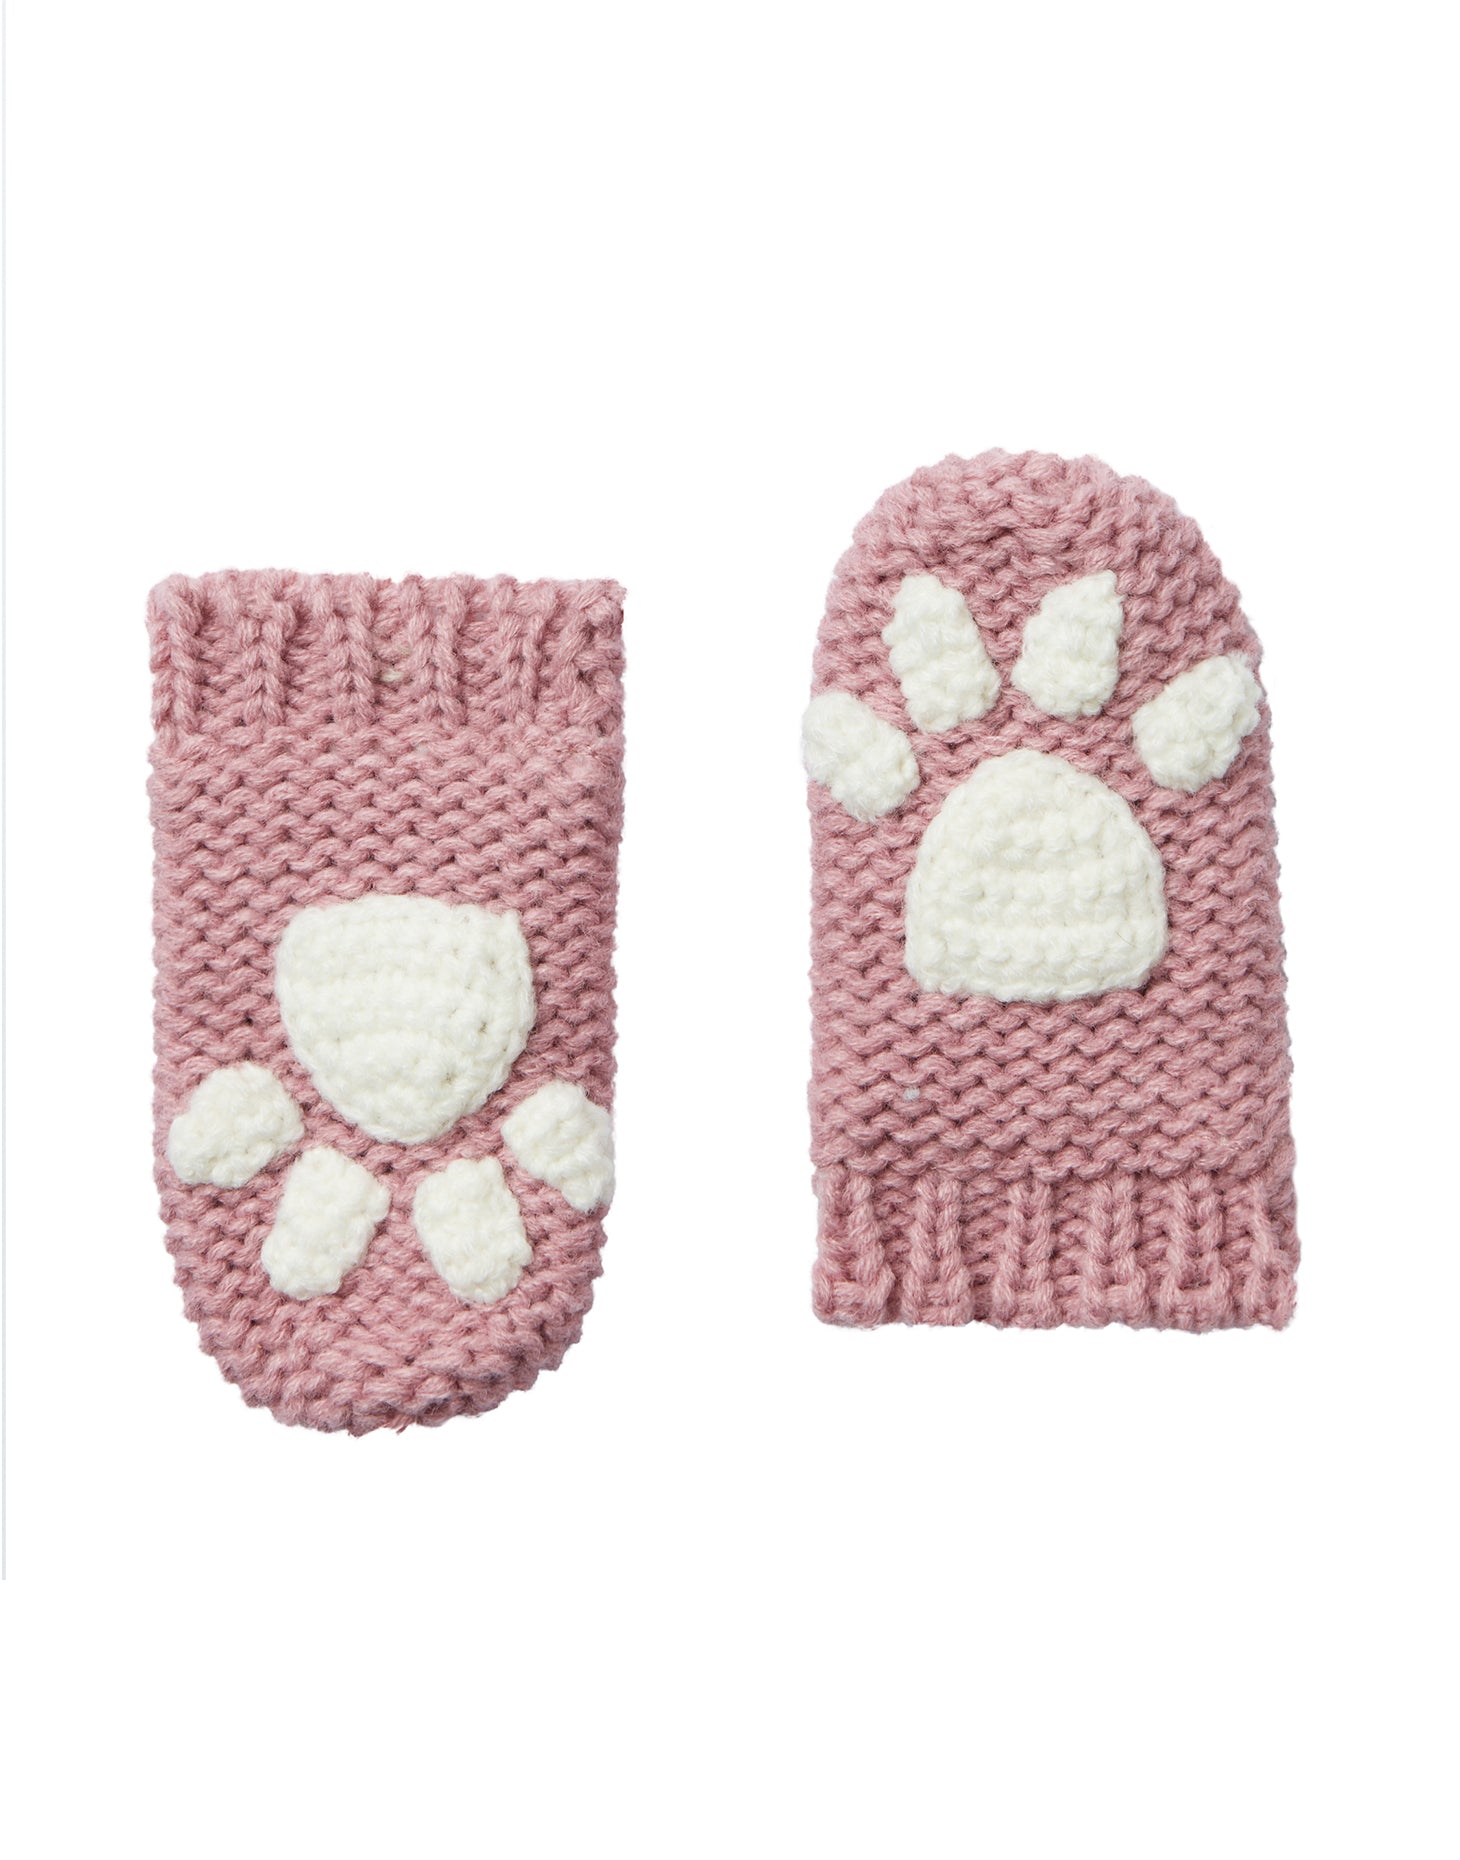 Paws Paw Mittens- Cherry Blossom